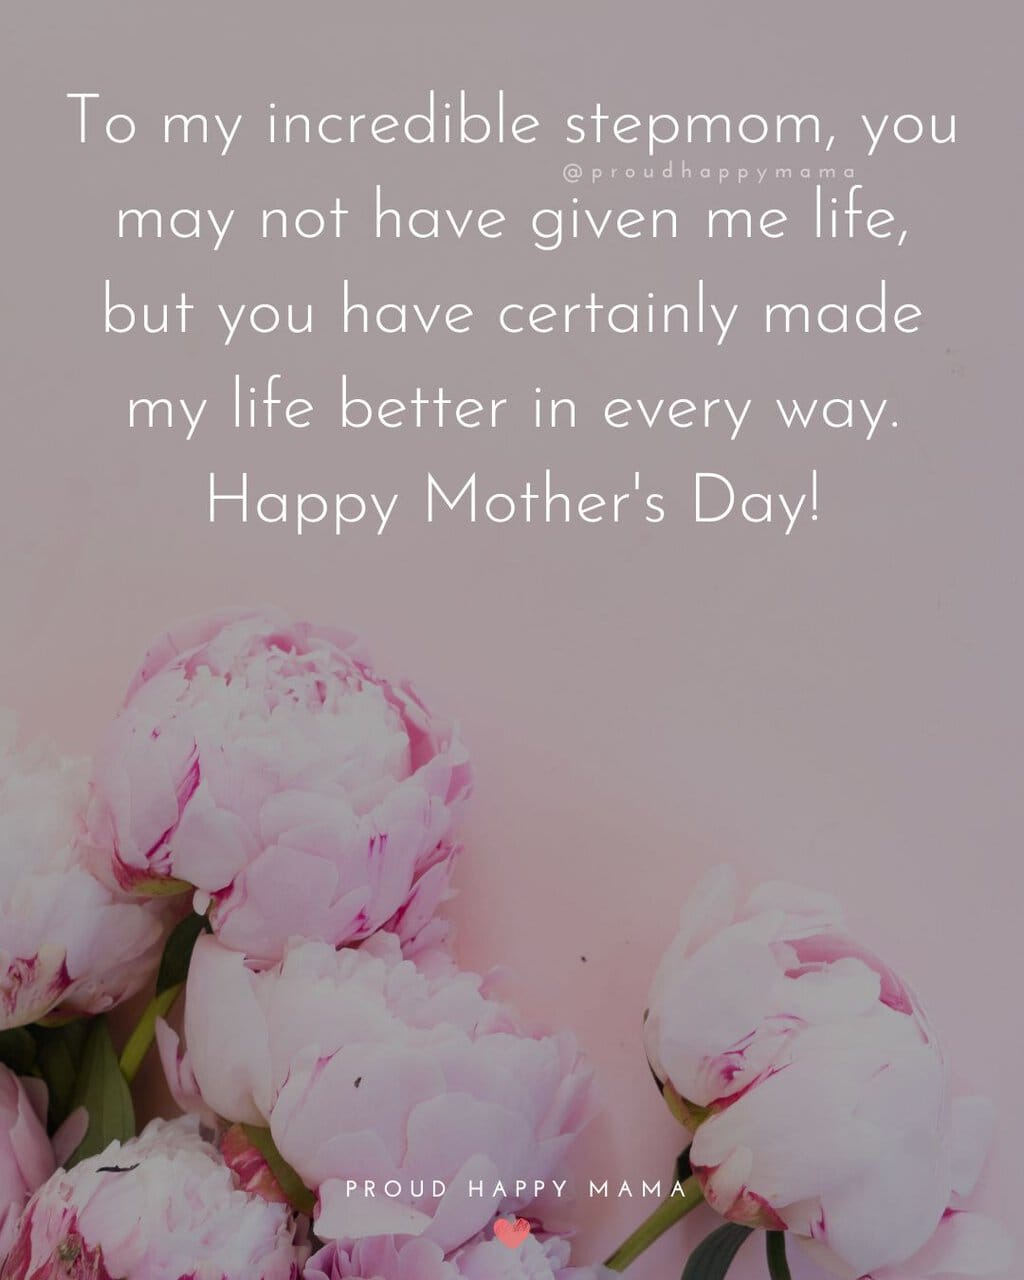 Best Mother's Day Quotes For Stepmom